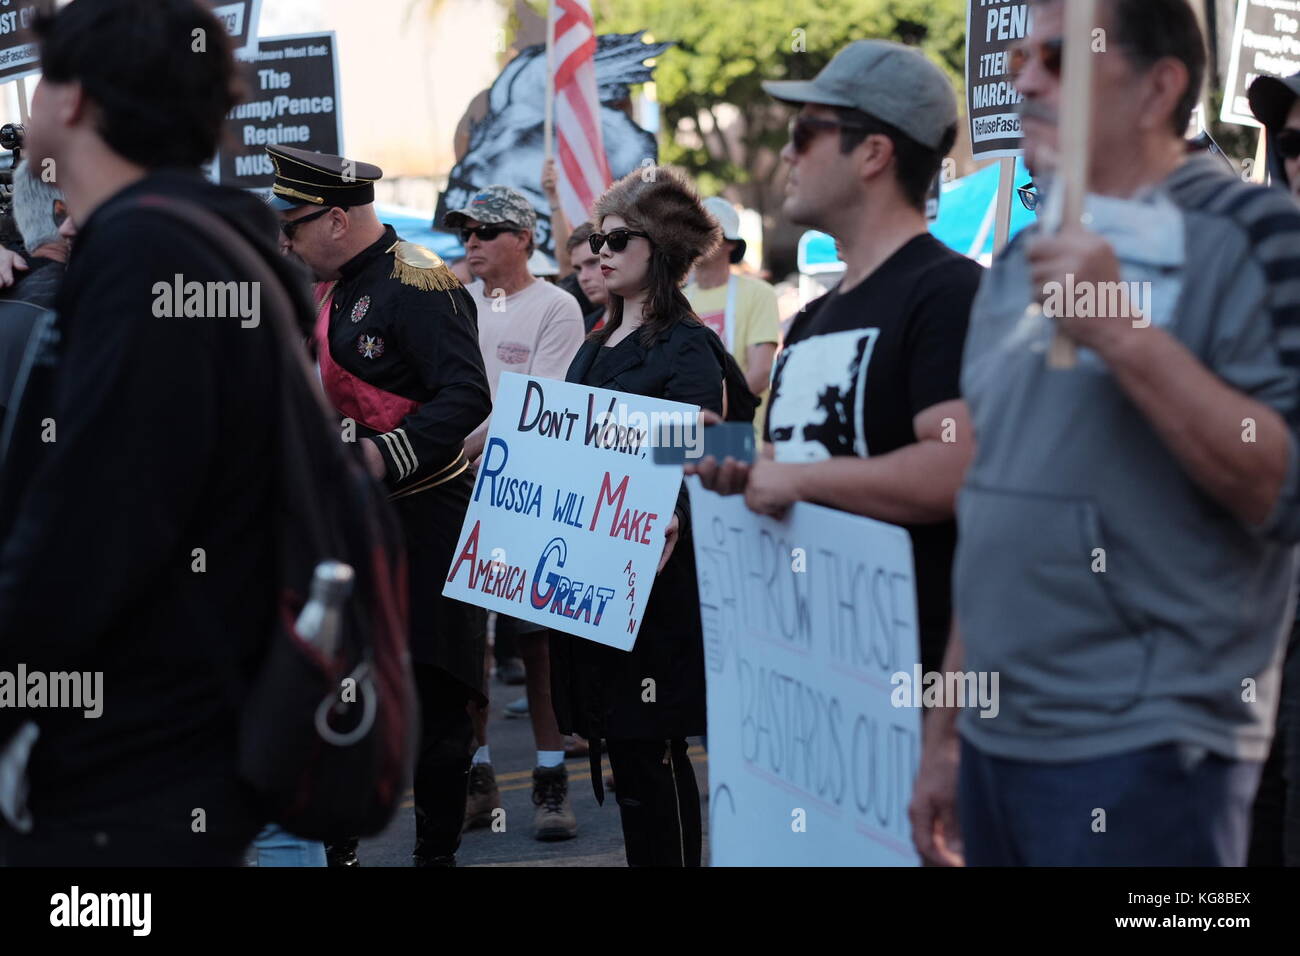 Anti- and pro-Trump protesters face off in downtown L.A. rally Credit: Eduardo Salazar/Alamy Live News Stock Photo